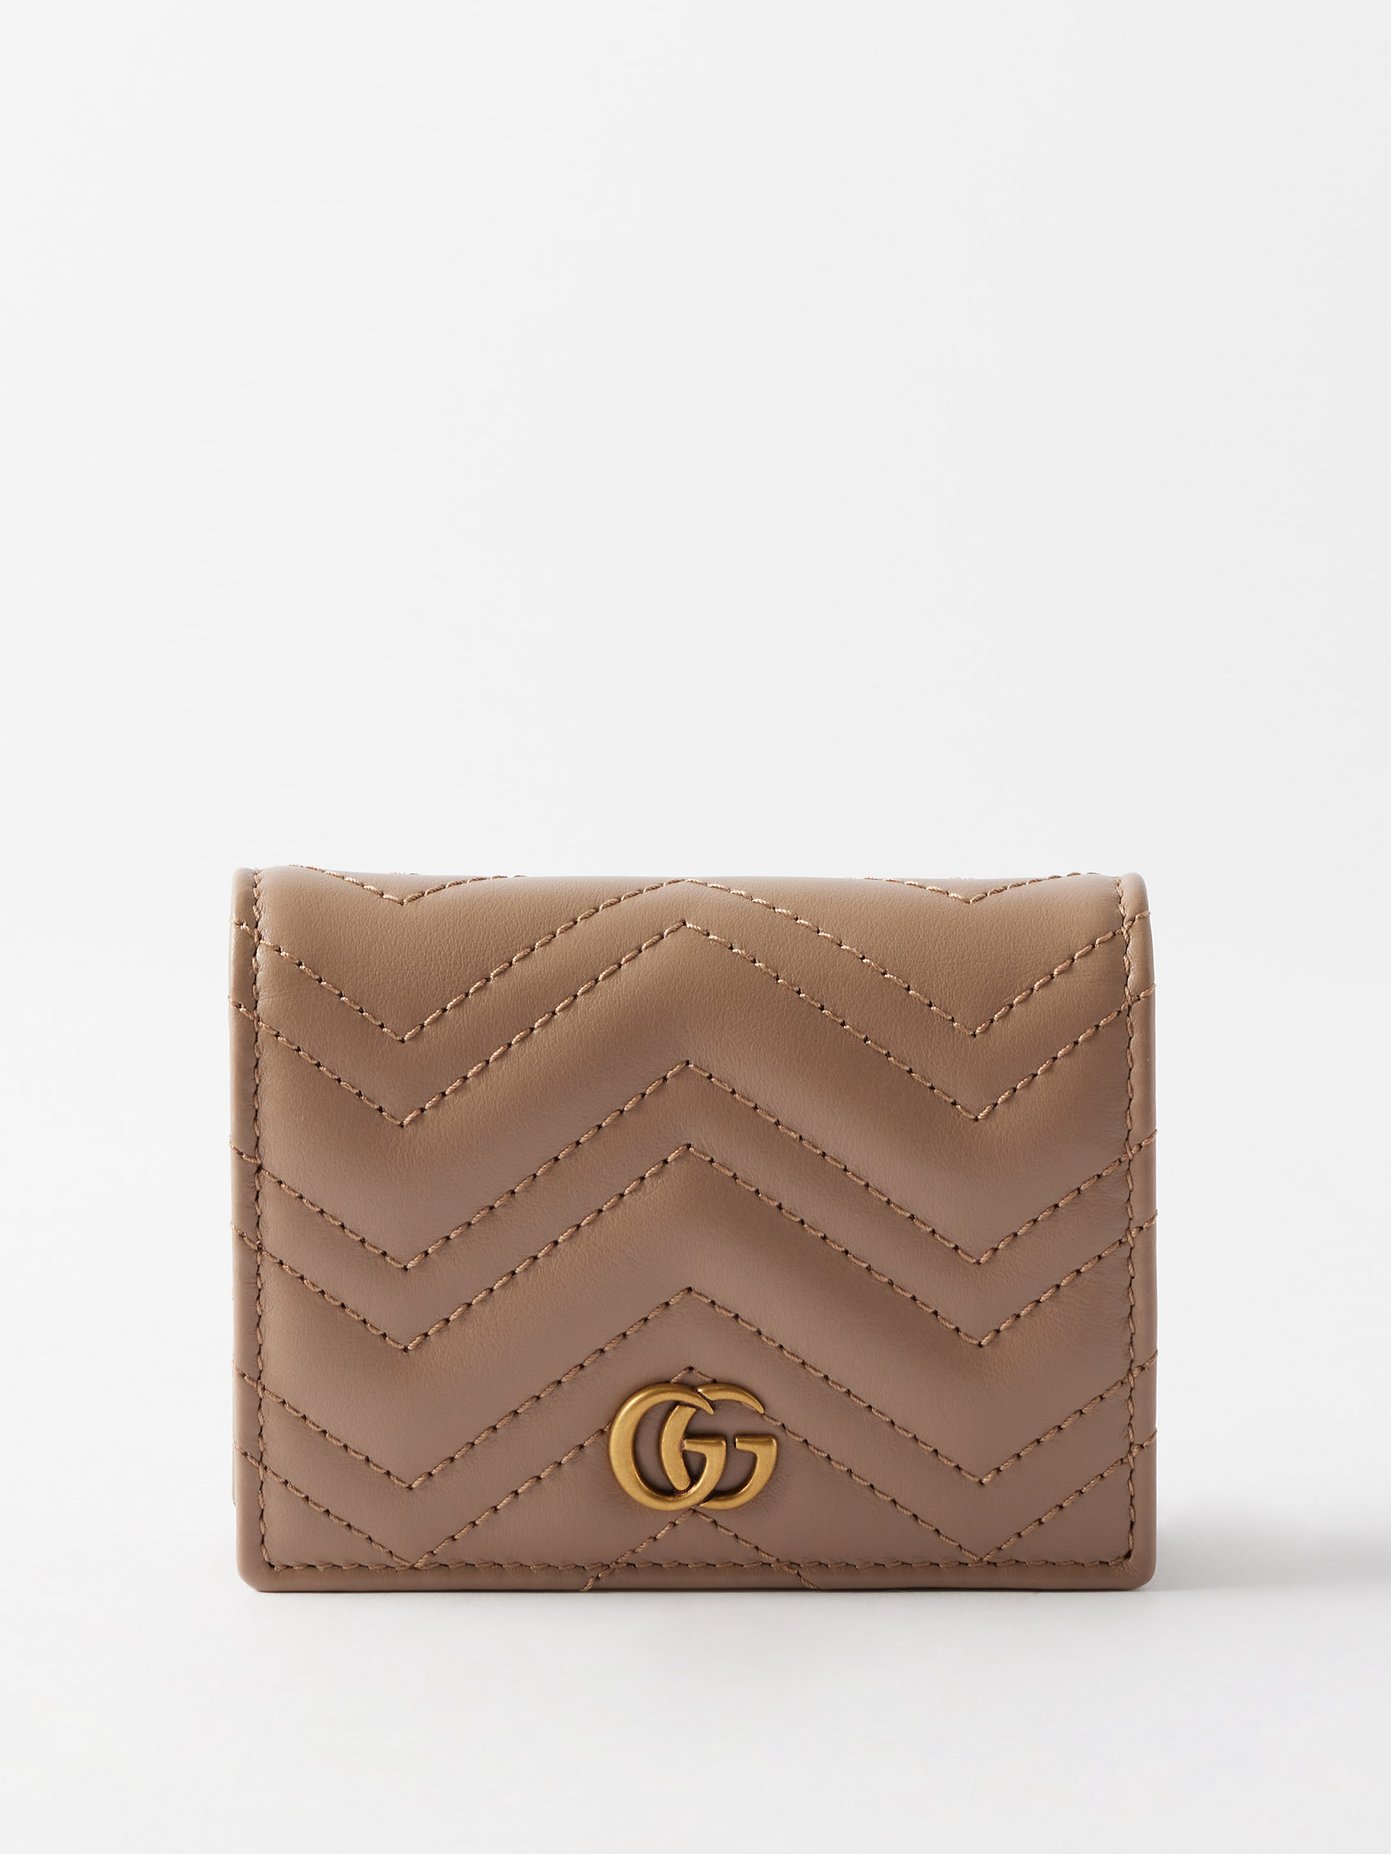 22SS 구찌 GG 마몽 반지갑, 퀼팅 Gucci Neutral GG Marmont quilted-leather wallet